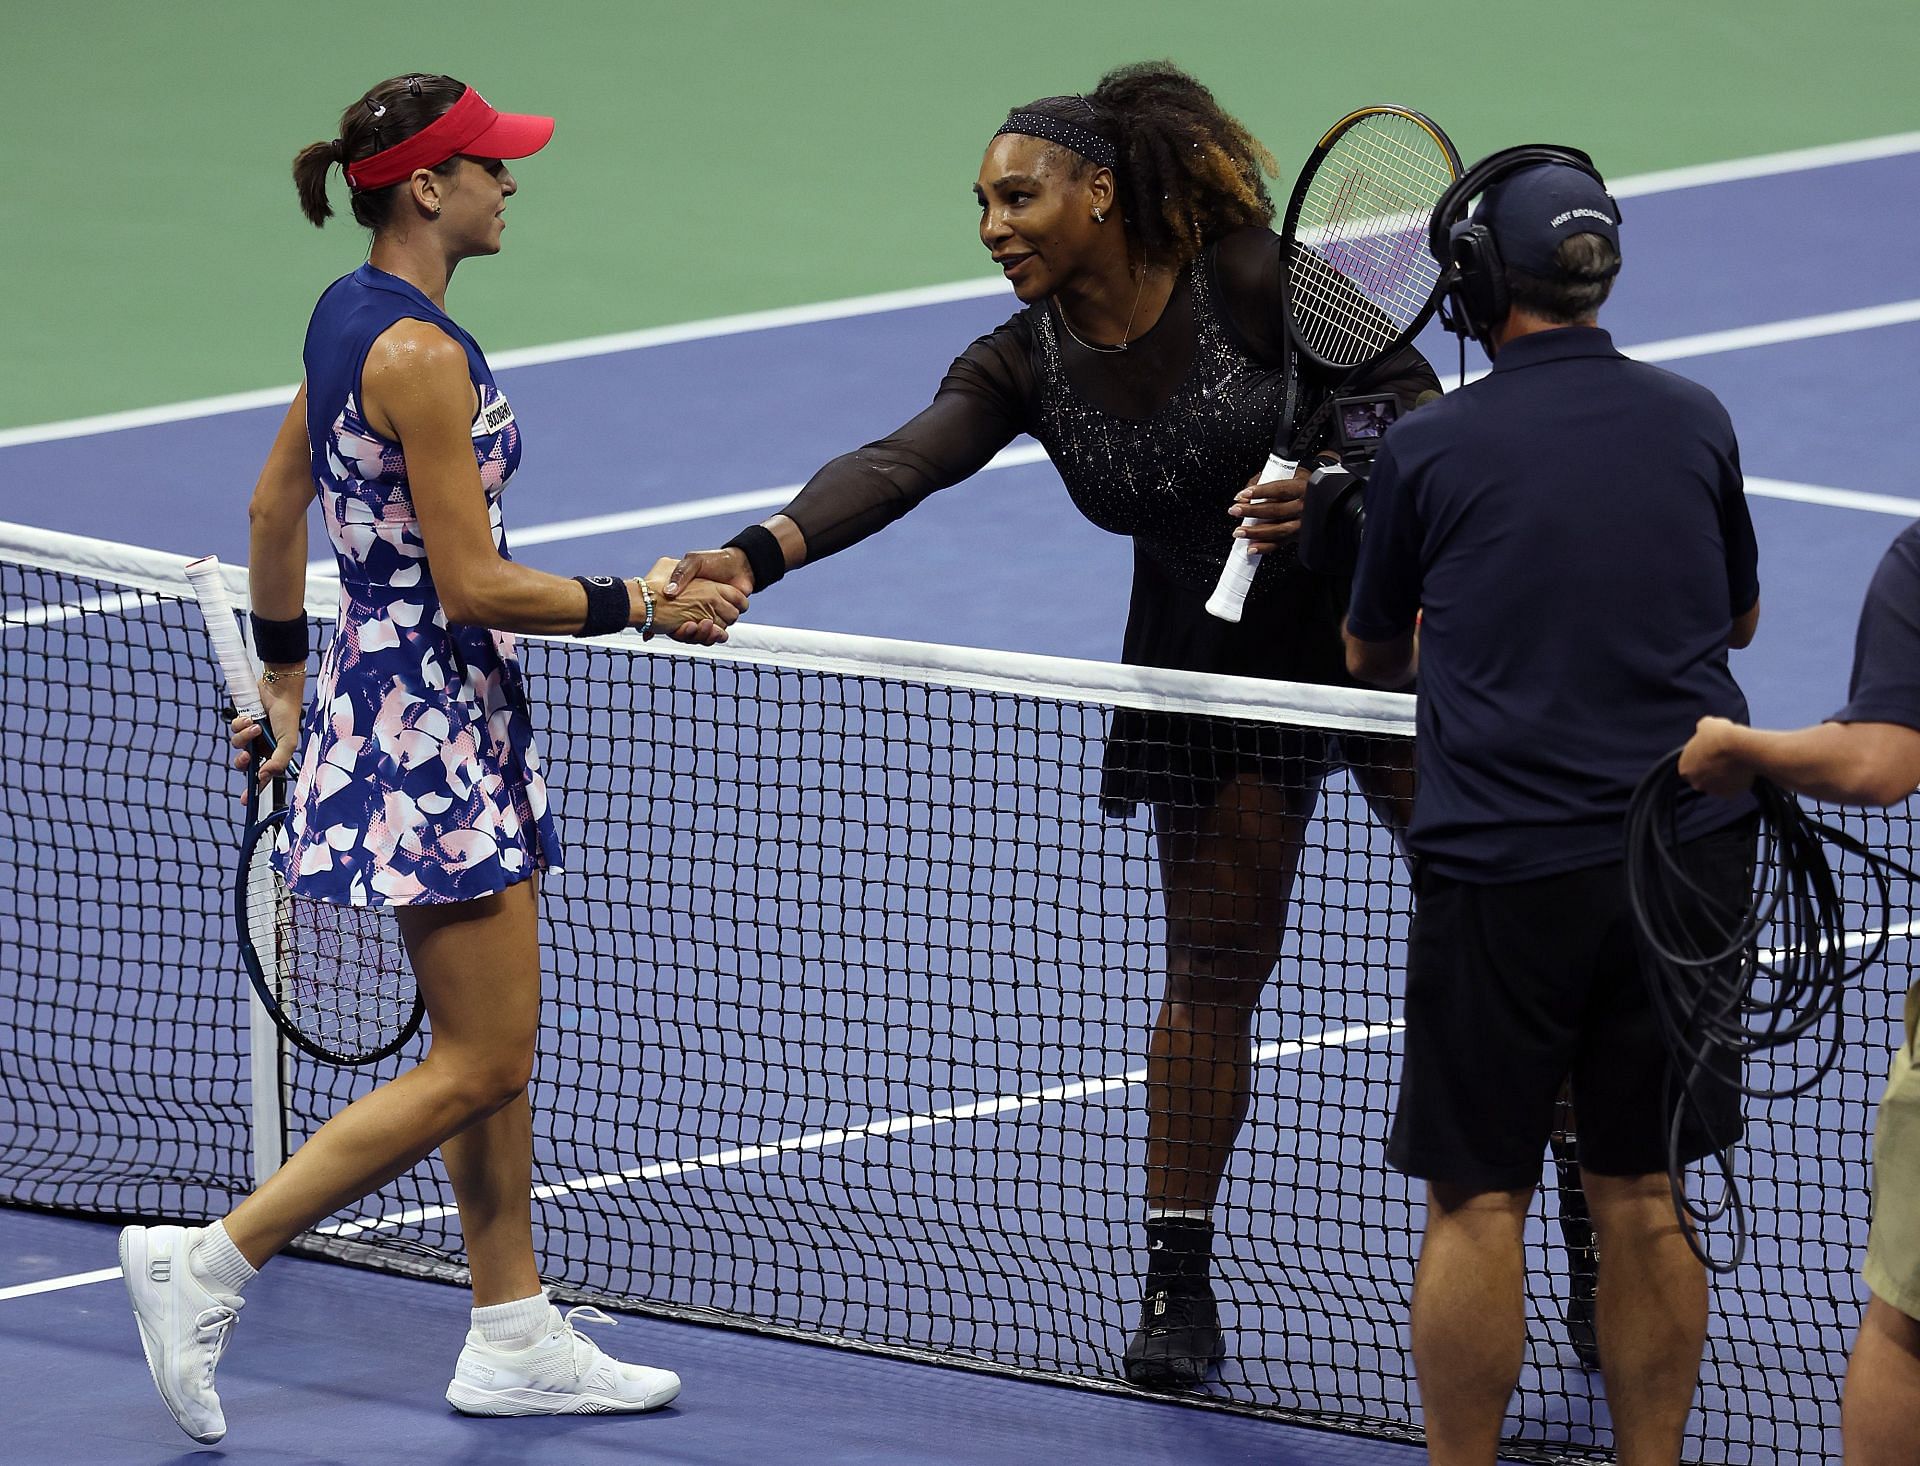 Serena Williams continues to enthrall fans after evolving away from the sport